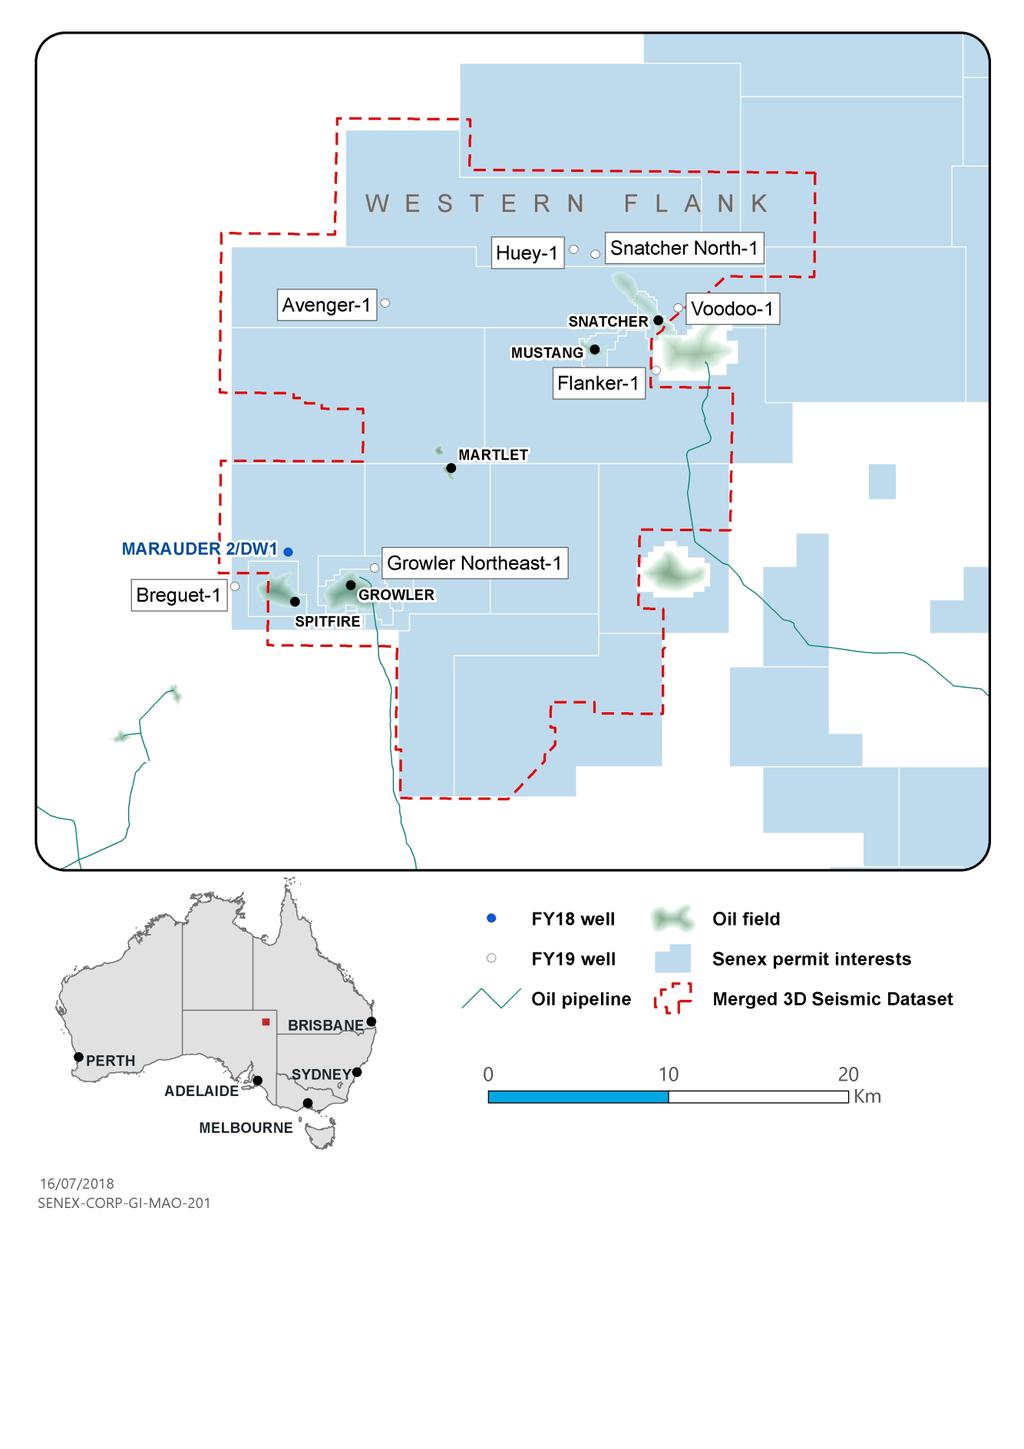 ly Report OIL BUSINESS COOPER BASIN Exploration and Development Western flank FY19 drilling program During the quarter, Senex completed the agreement with Beach Energy to transfer the free-carry